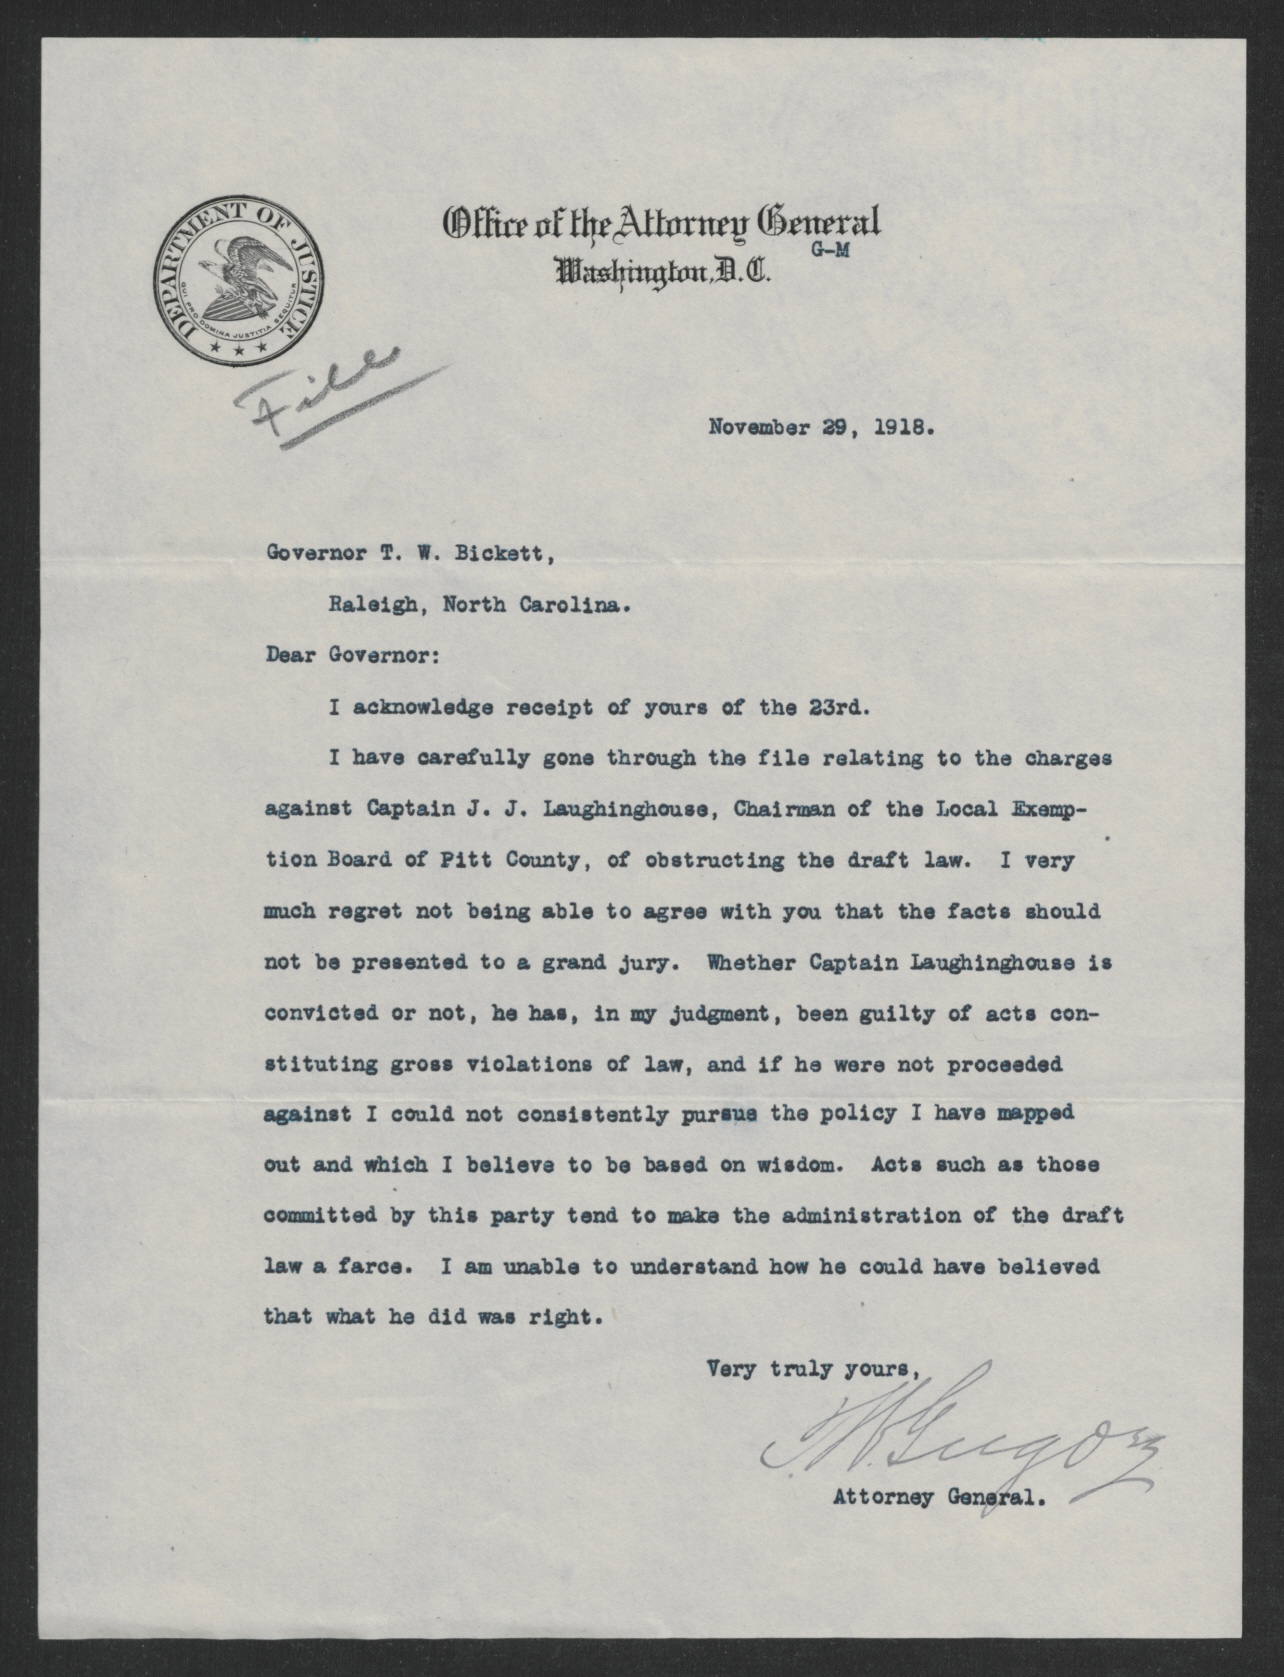 Letter from Thomas W. Gregory to Thomas W. Bickett, November 29, 1918